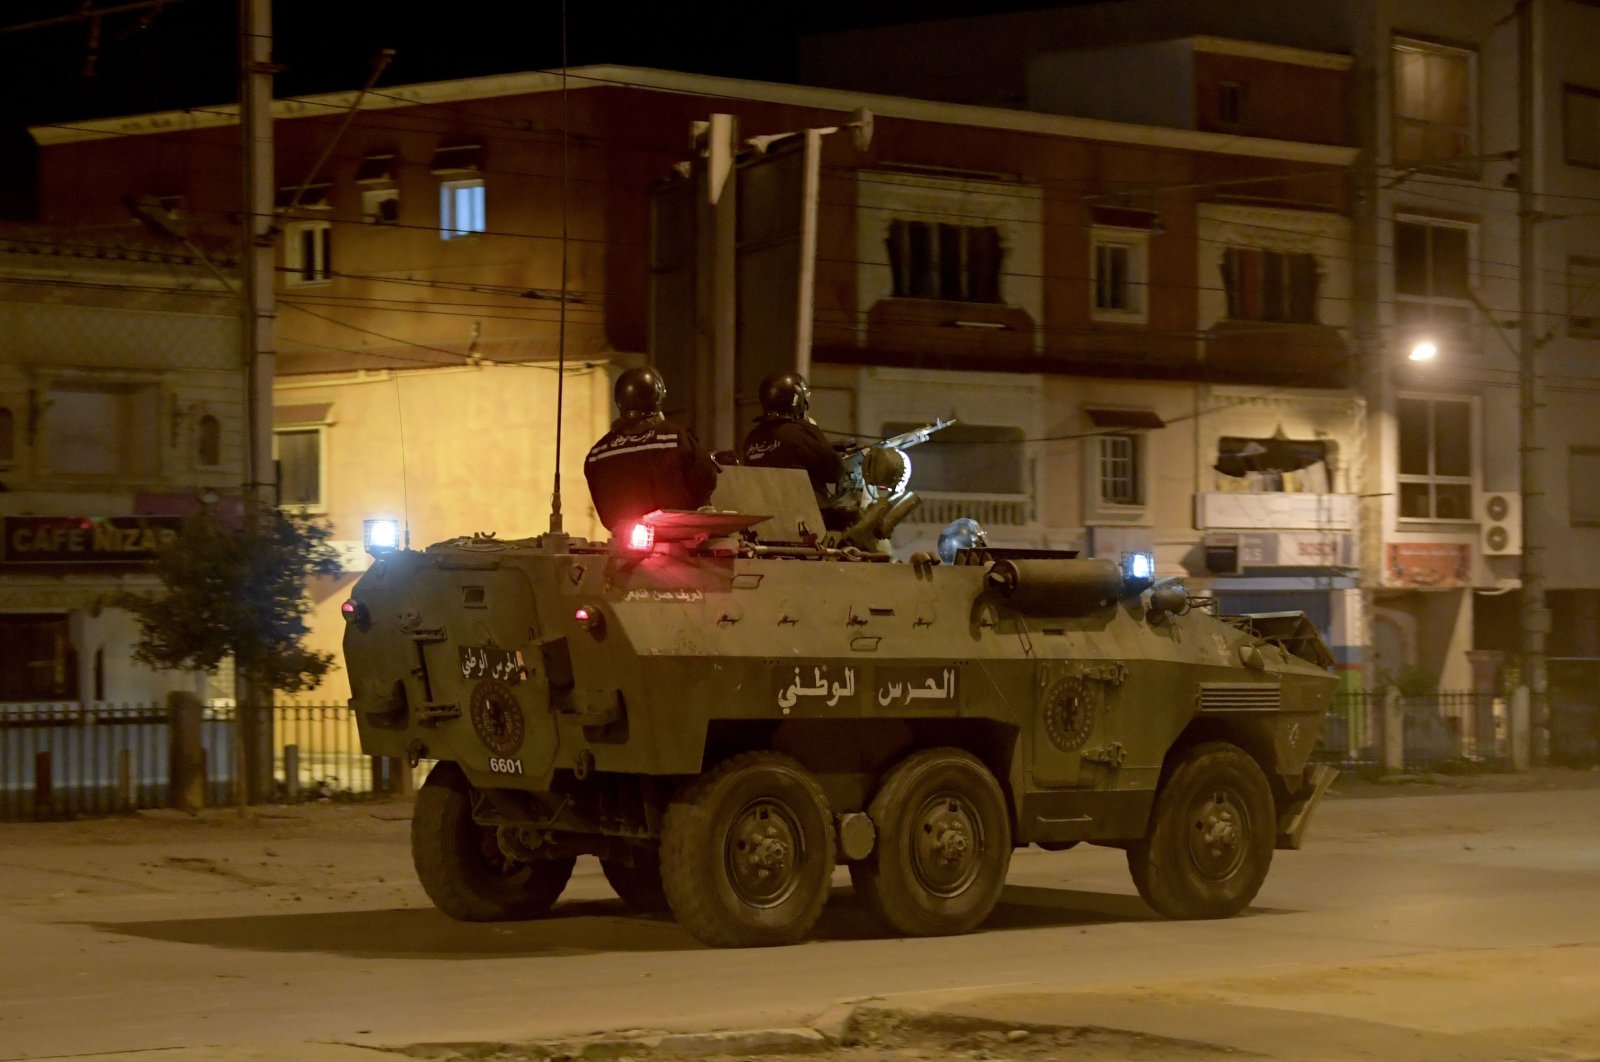 Members of the Tunisian National Guard sit atop their armored vehicle as they deploy on a street amid clashes with demonstrators following a protest in the Ettadhamen neighborhood in the capital Tunis, on Jan. 17, 2021. (AFP Photo)